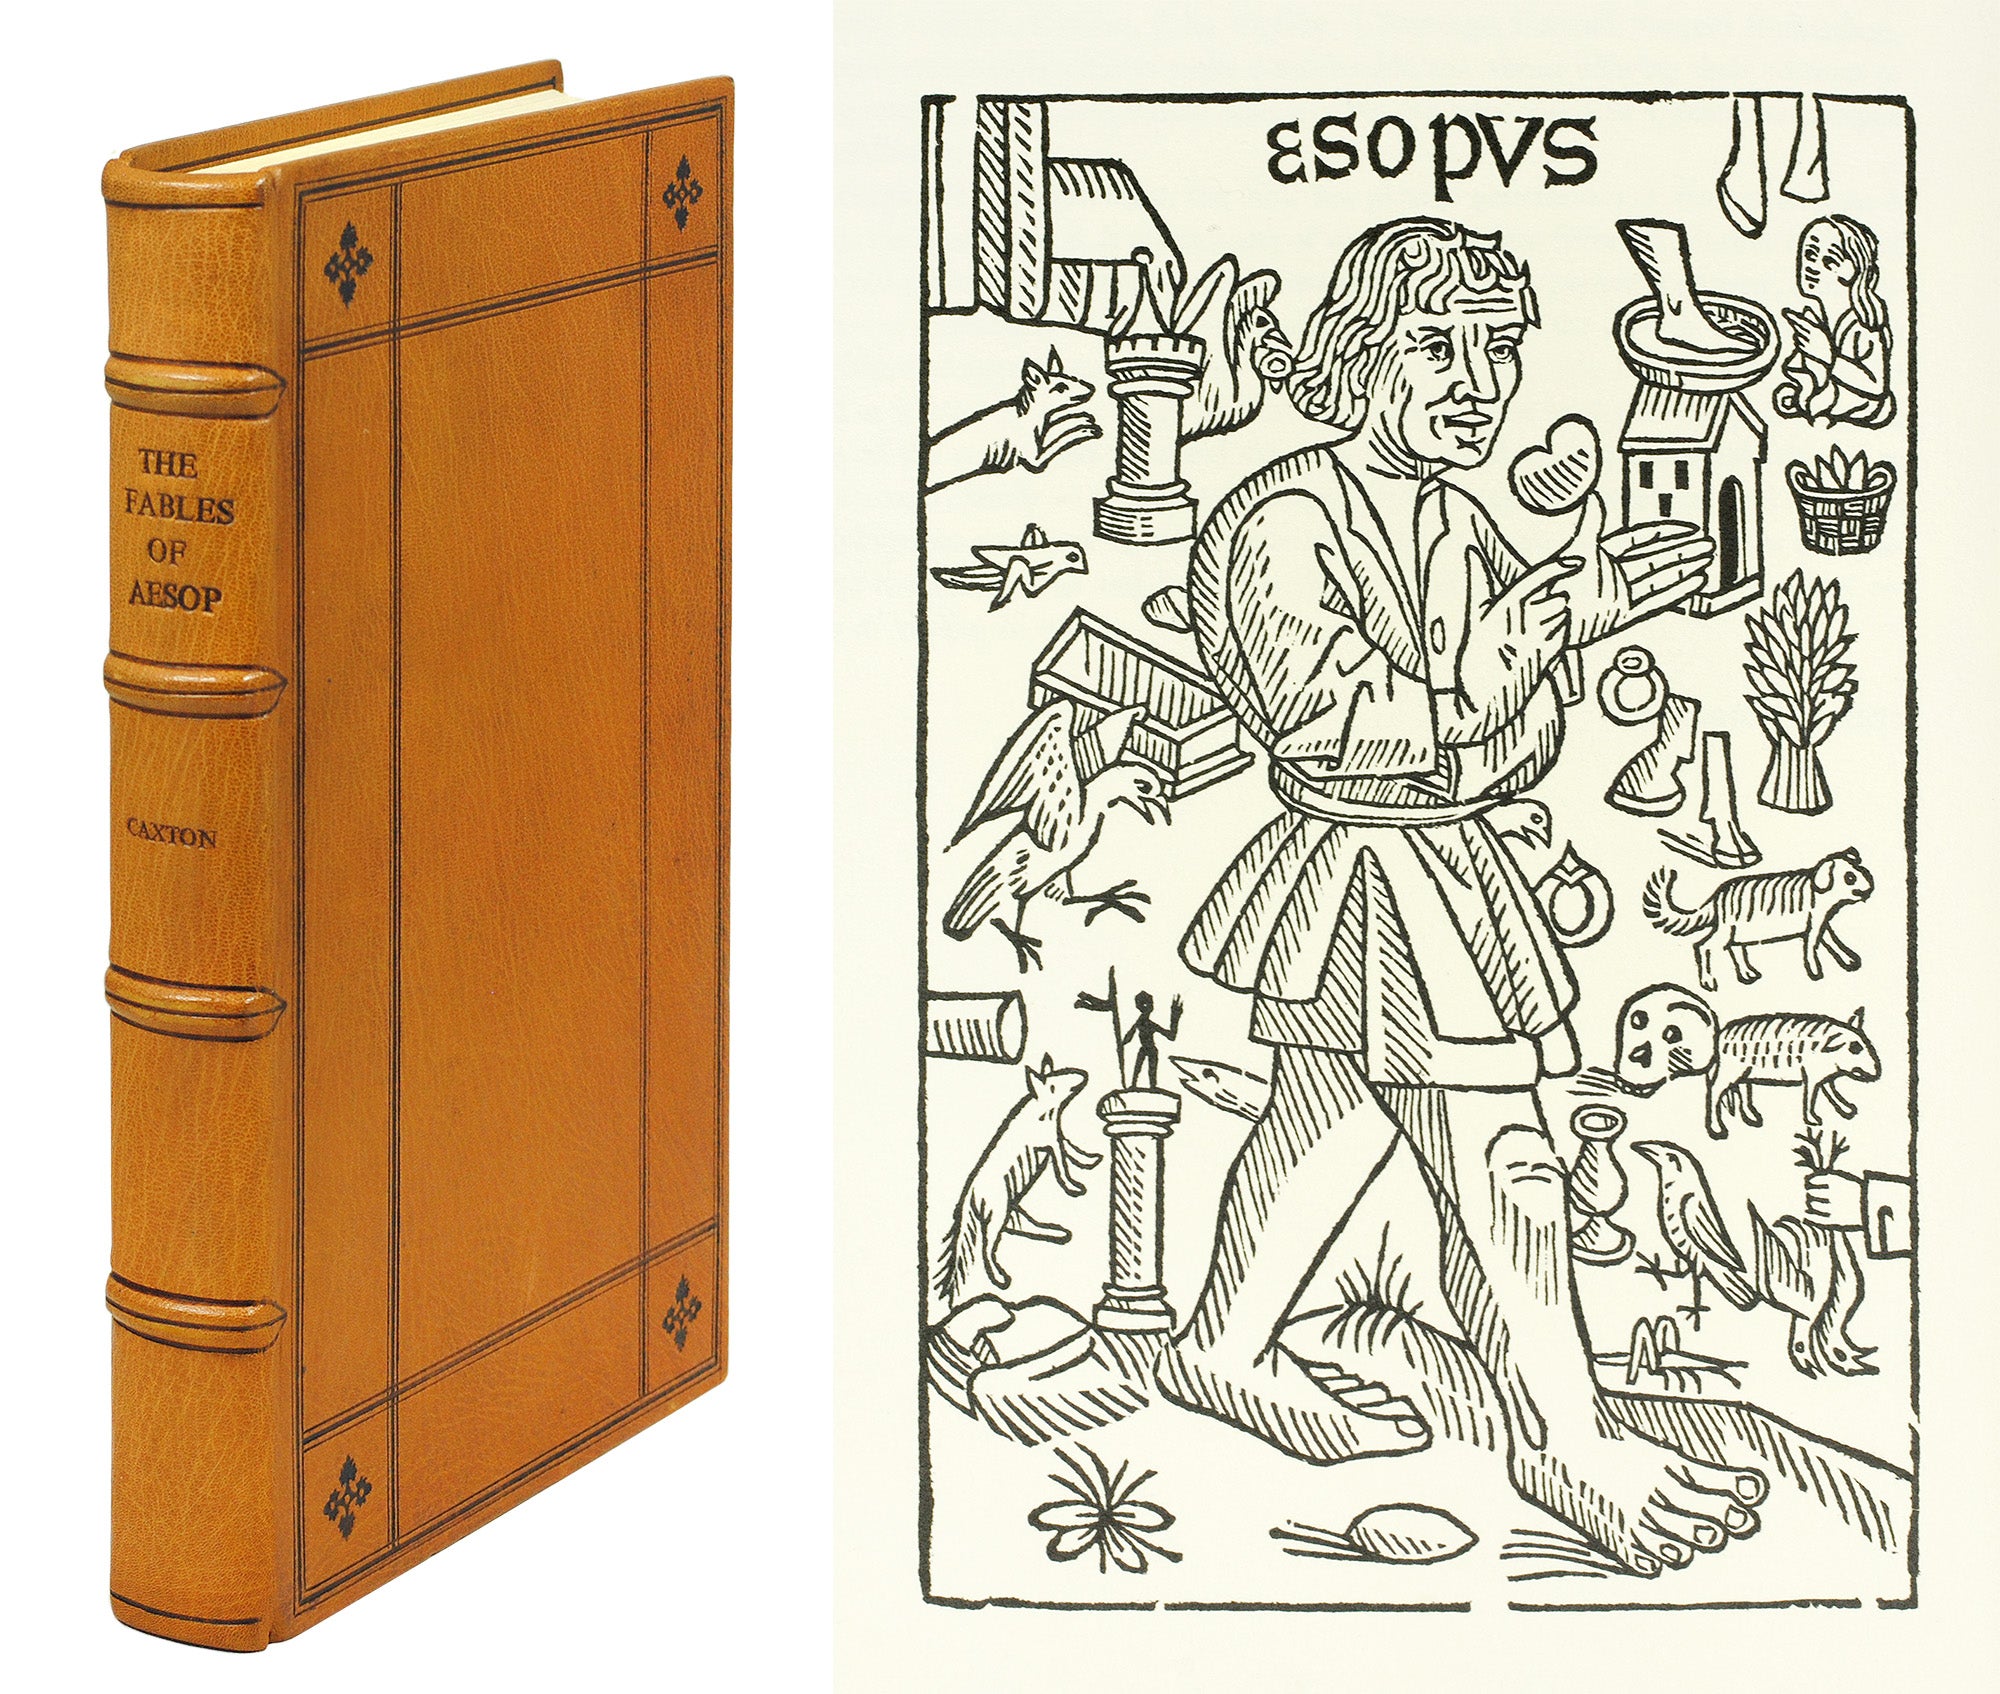 The History and Fables of Aesop, Translated and Printed by William Caxton,  1484. Reproduced in facsimile from the Copy in the Royal Library, Windsor  